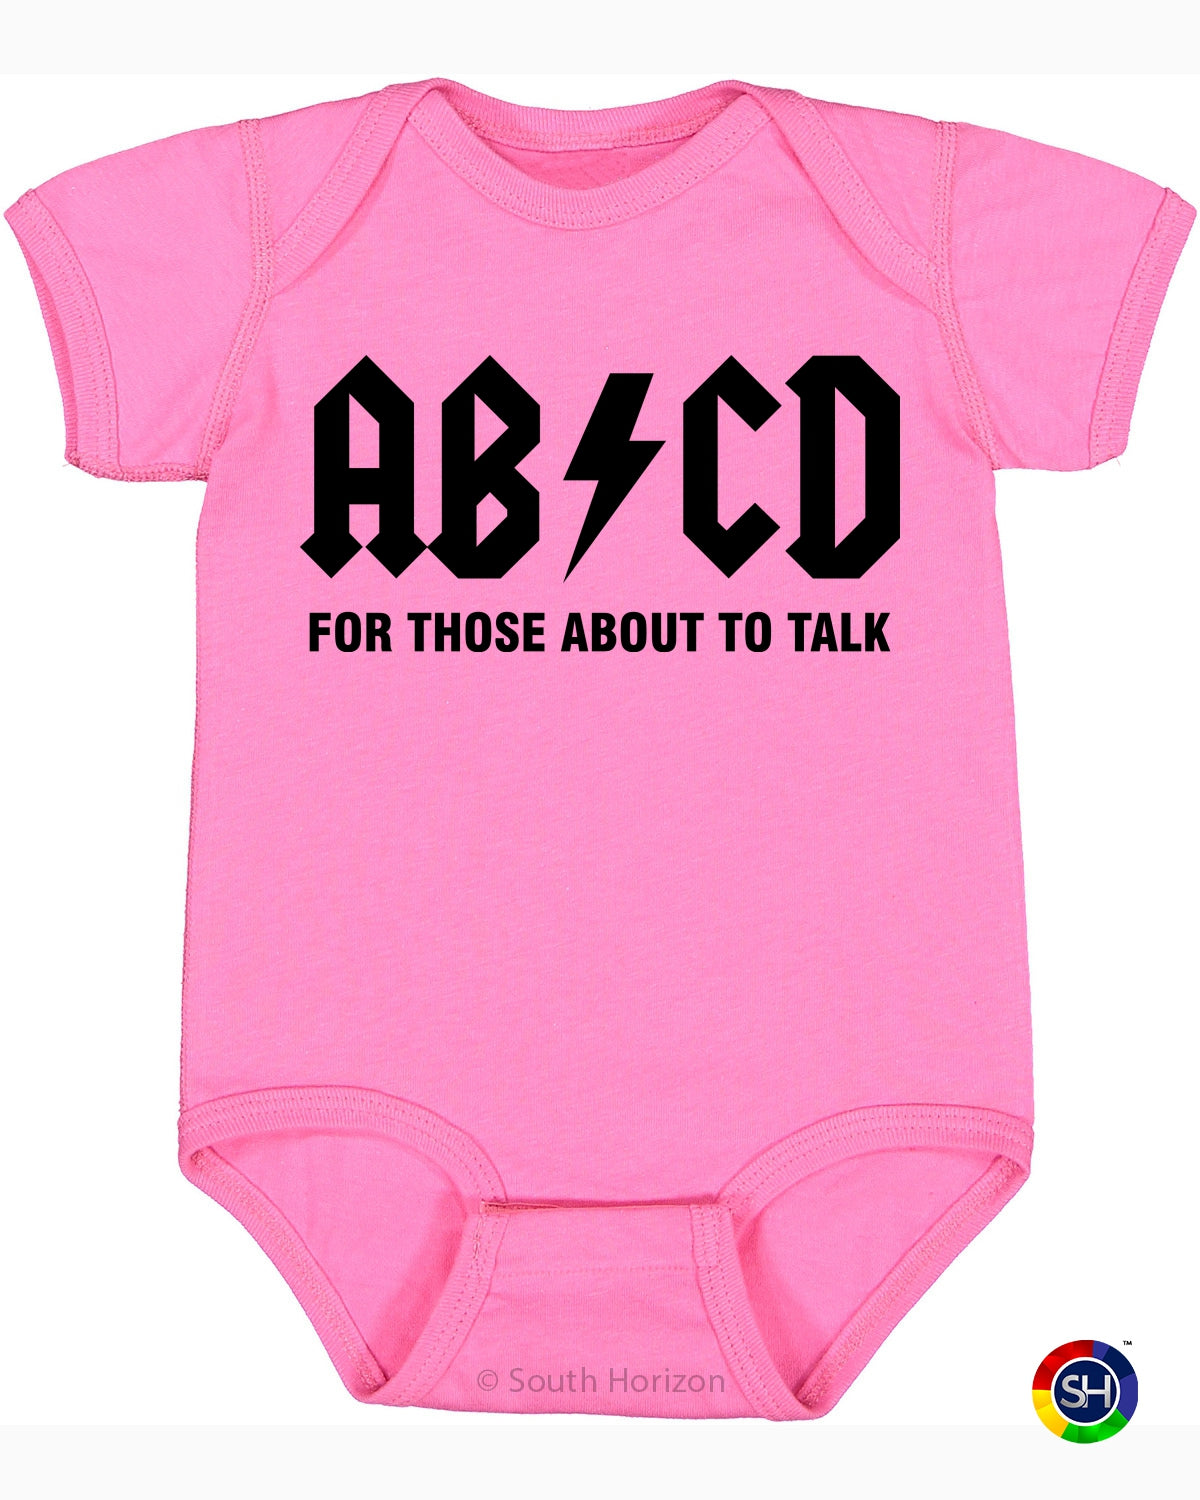 ABCD For Those About To Talk Infant BodySuit (#1084-10)